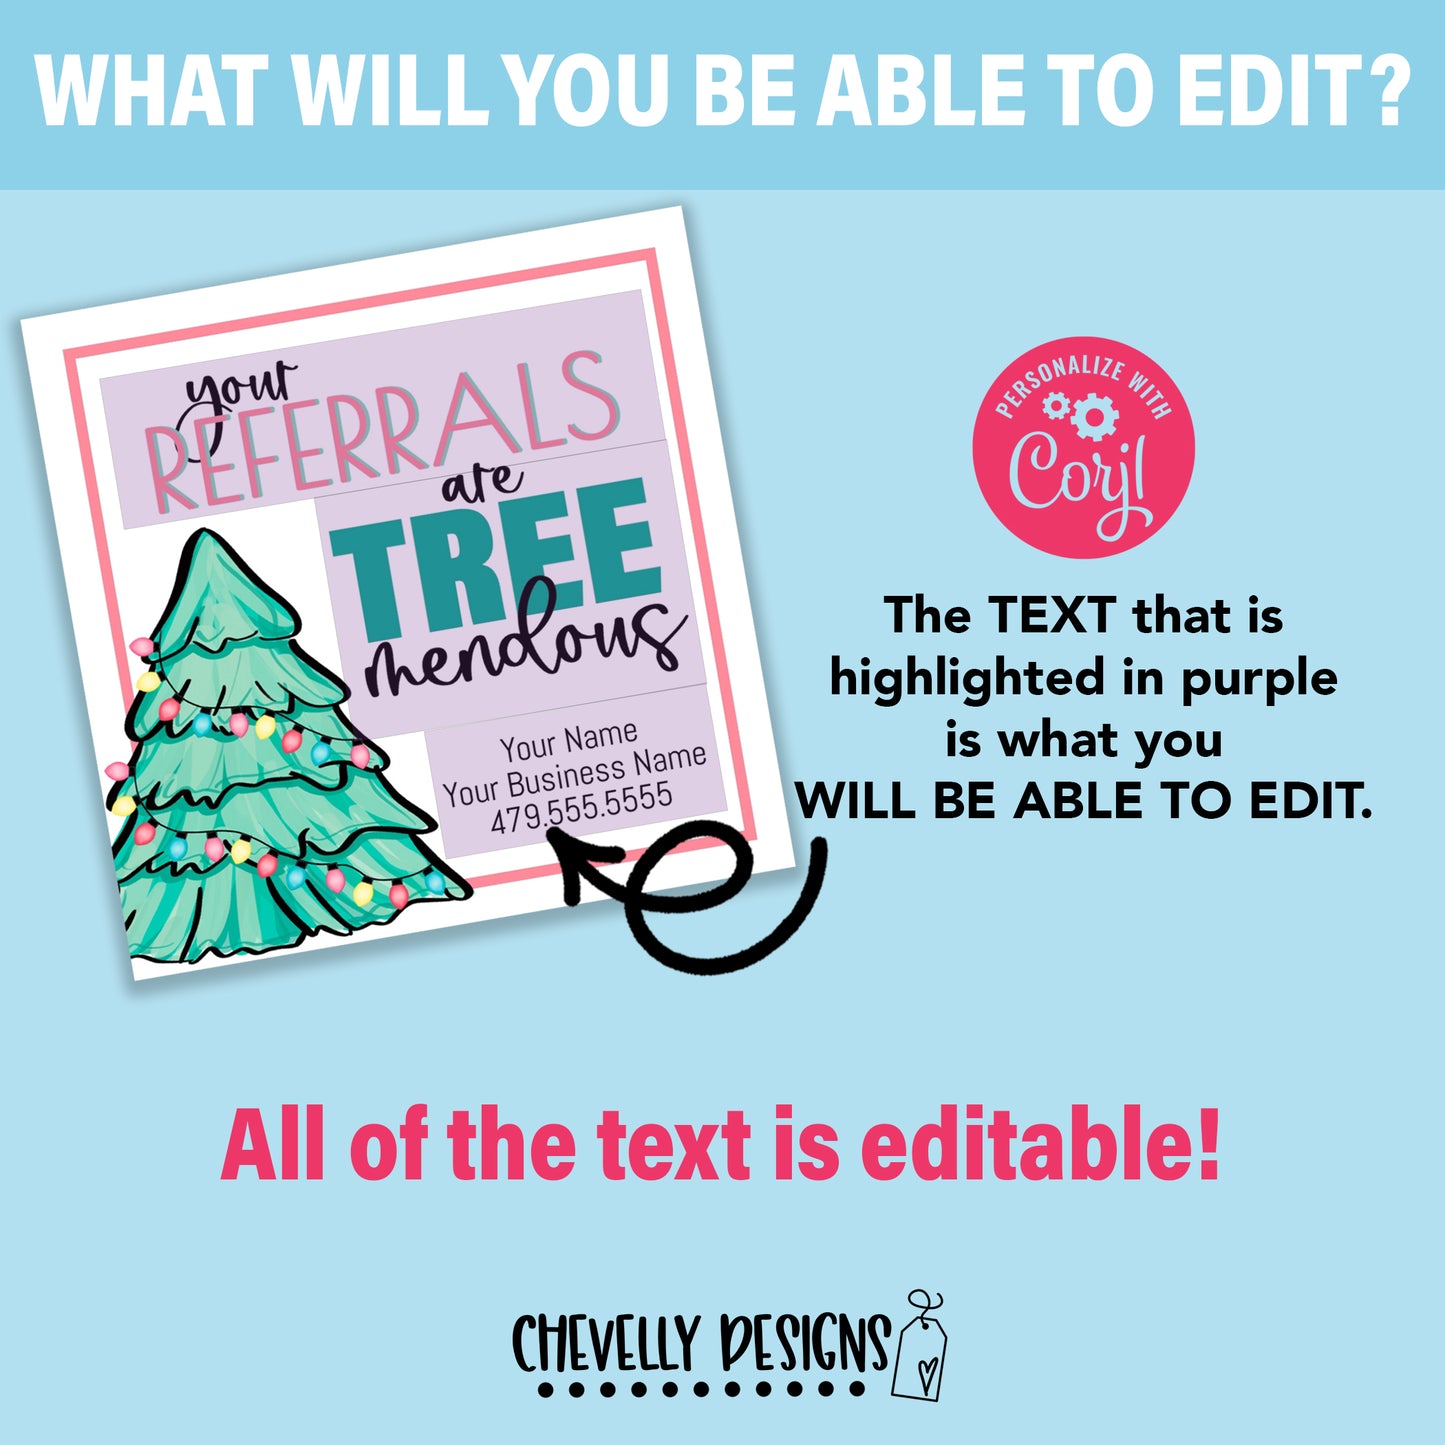 Editable - Your Referrals are Tree-mendous - Printable Digital File